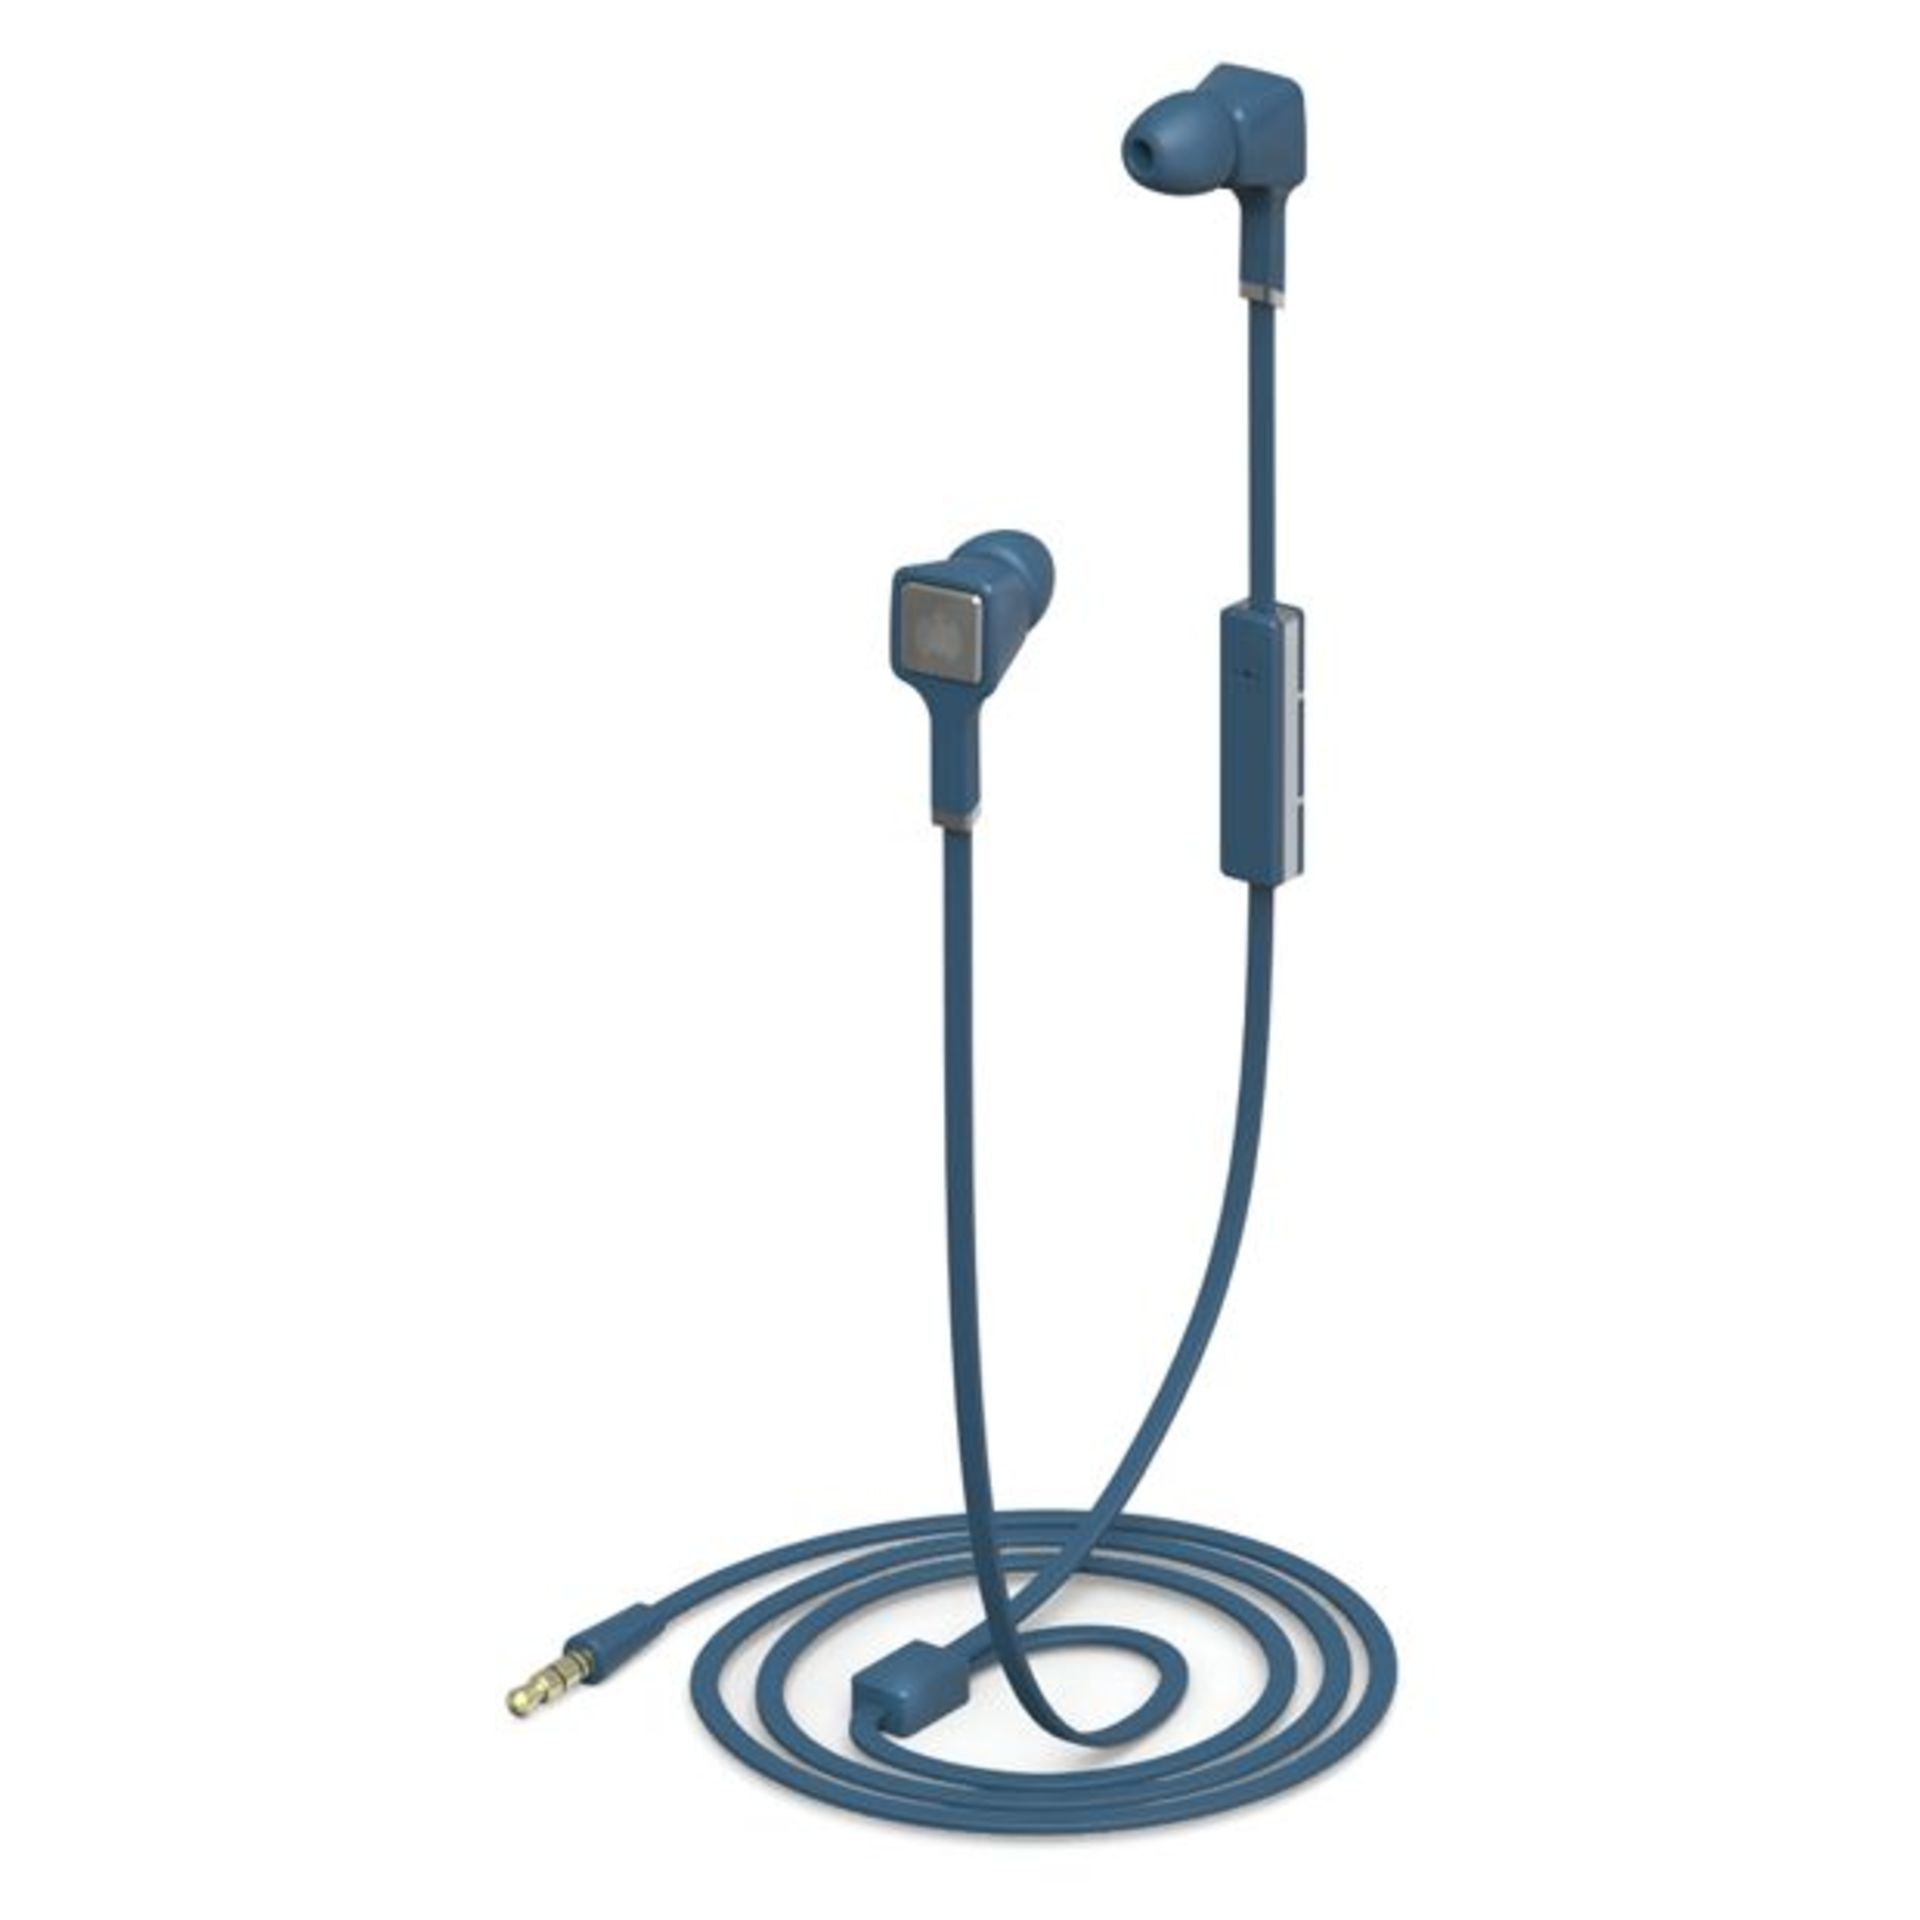 V *TRADE QTY* Brand New Ministry Of Sound Audio In - In Ear Headphones - Blue/Grey - RRP£39.99 X 3